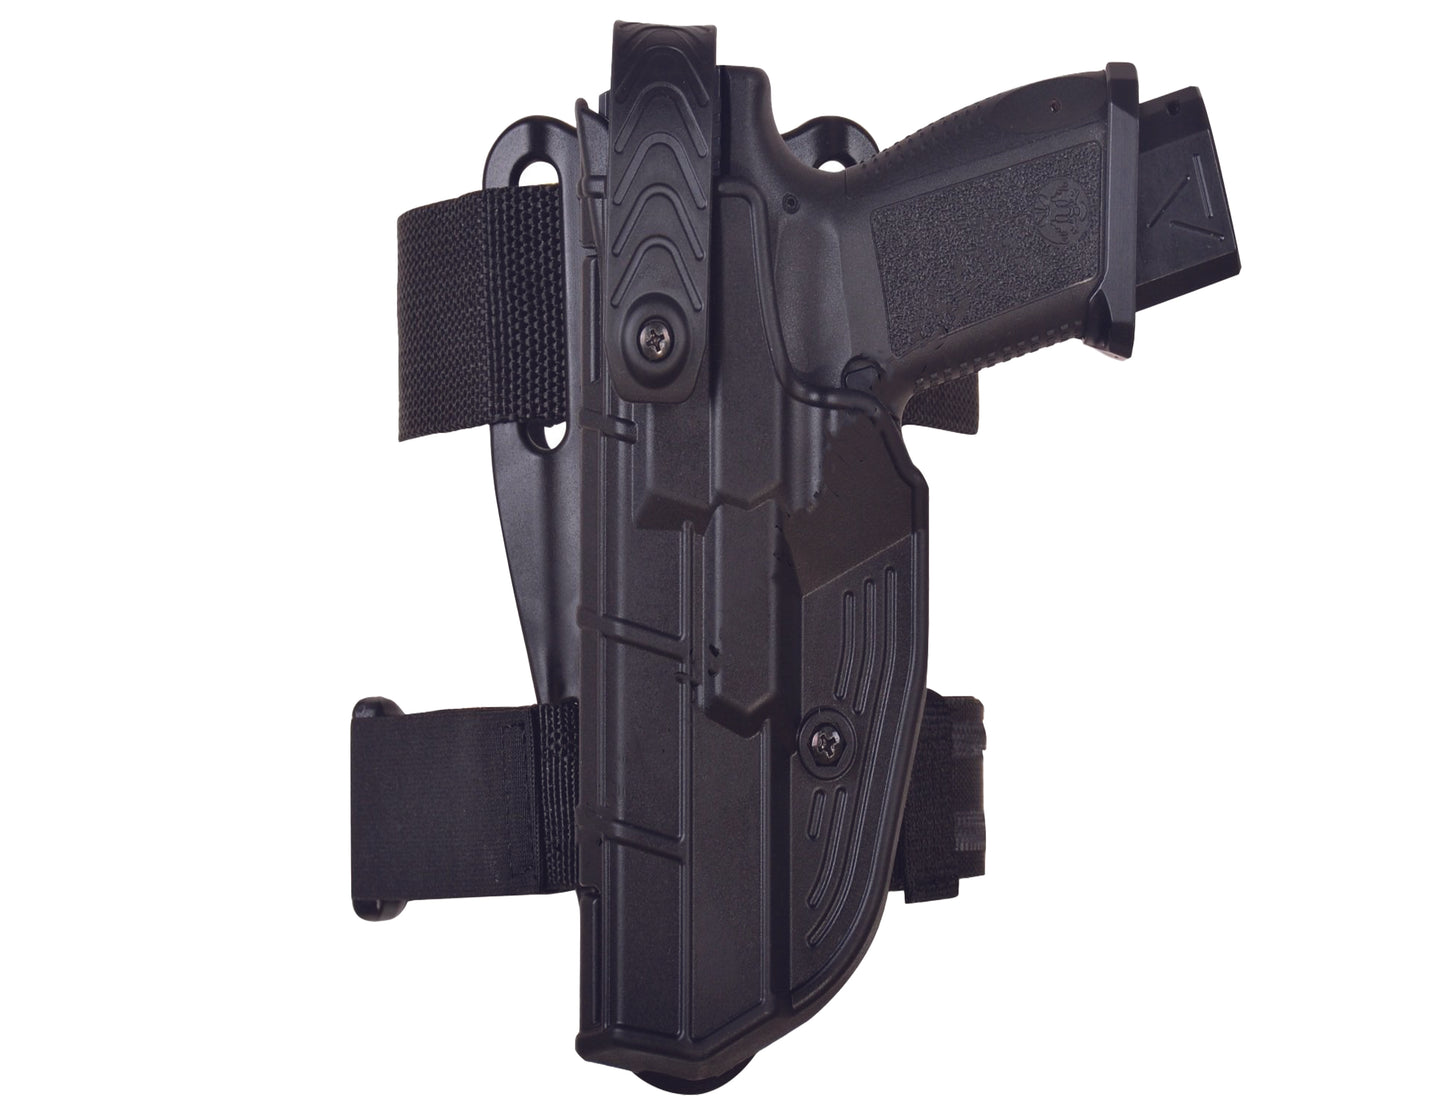 SAR 9 Level 2 Retention Duty Holster, Low Ride, RH or LH